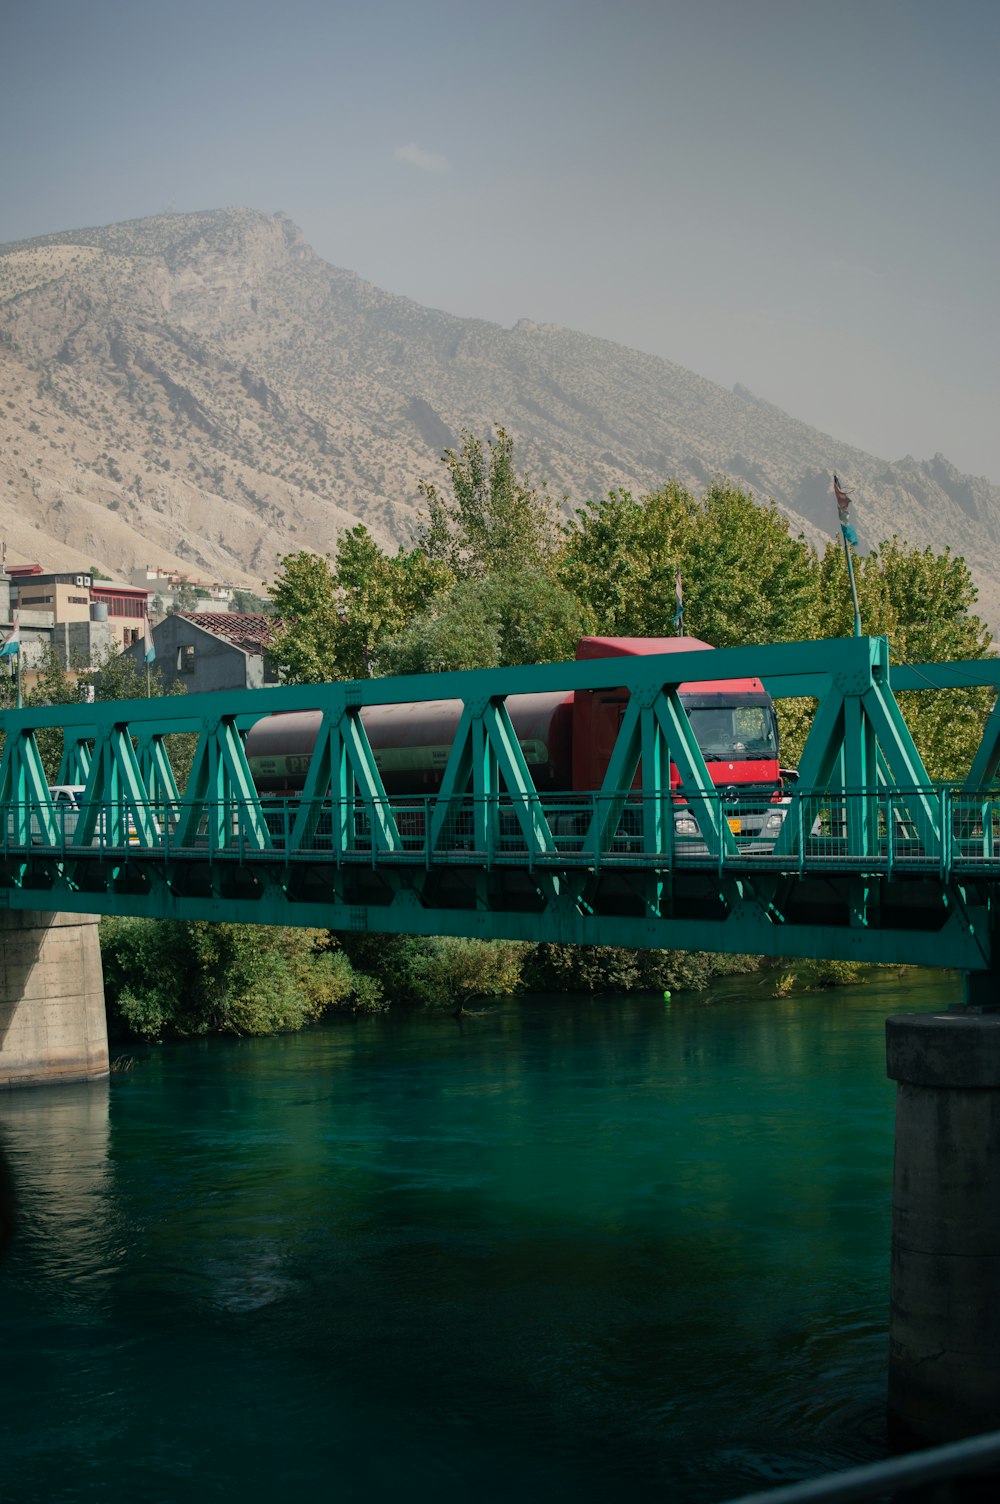 a red bus is crossing a bridge over a river